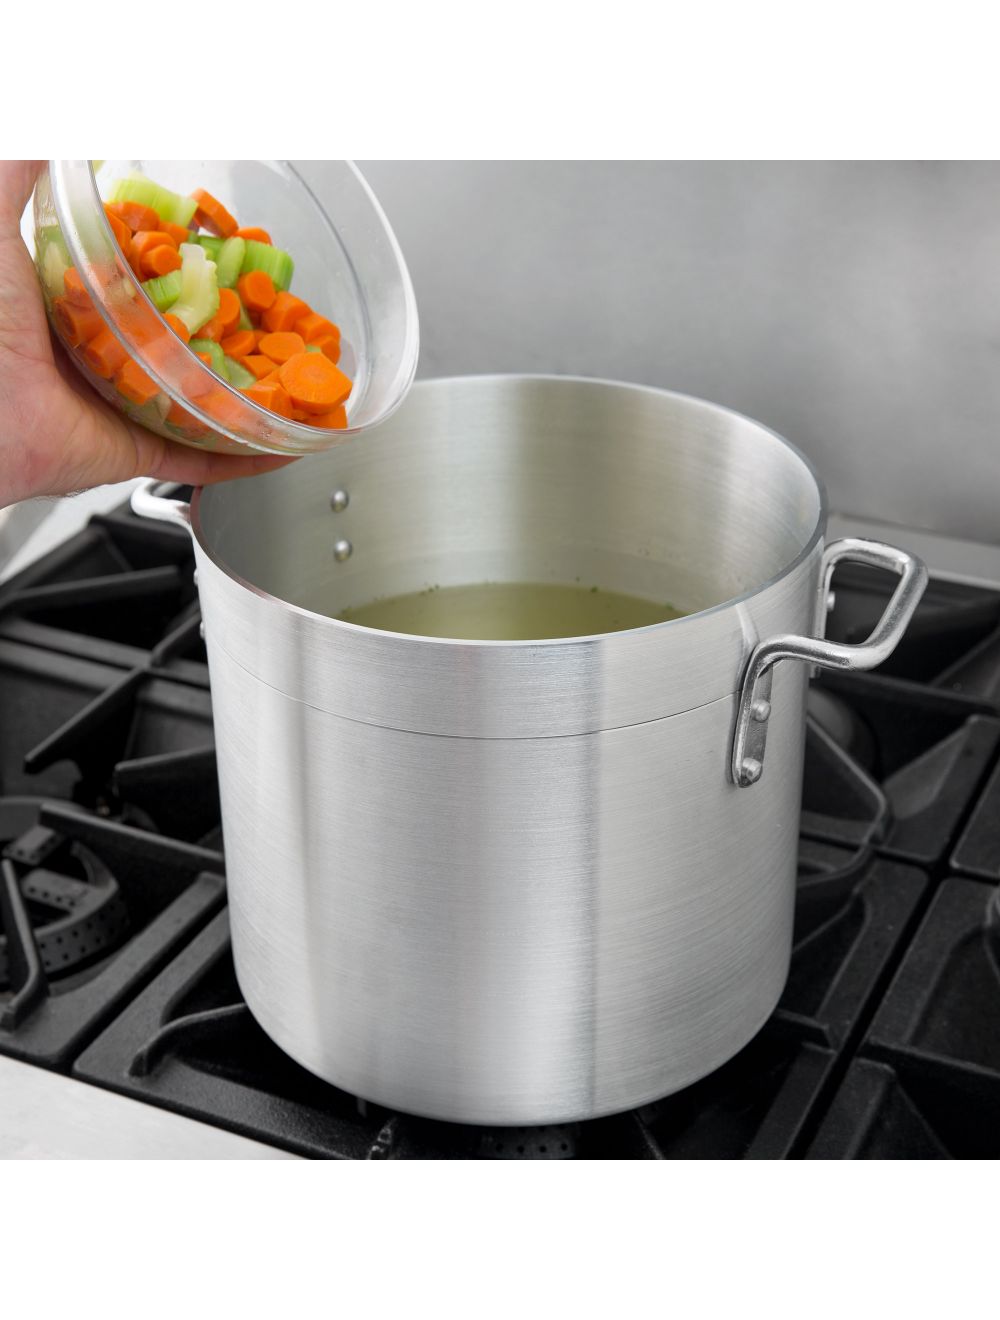 Stock Pots - Liberty Tabletop - Cookware Made in the USA